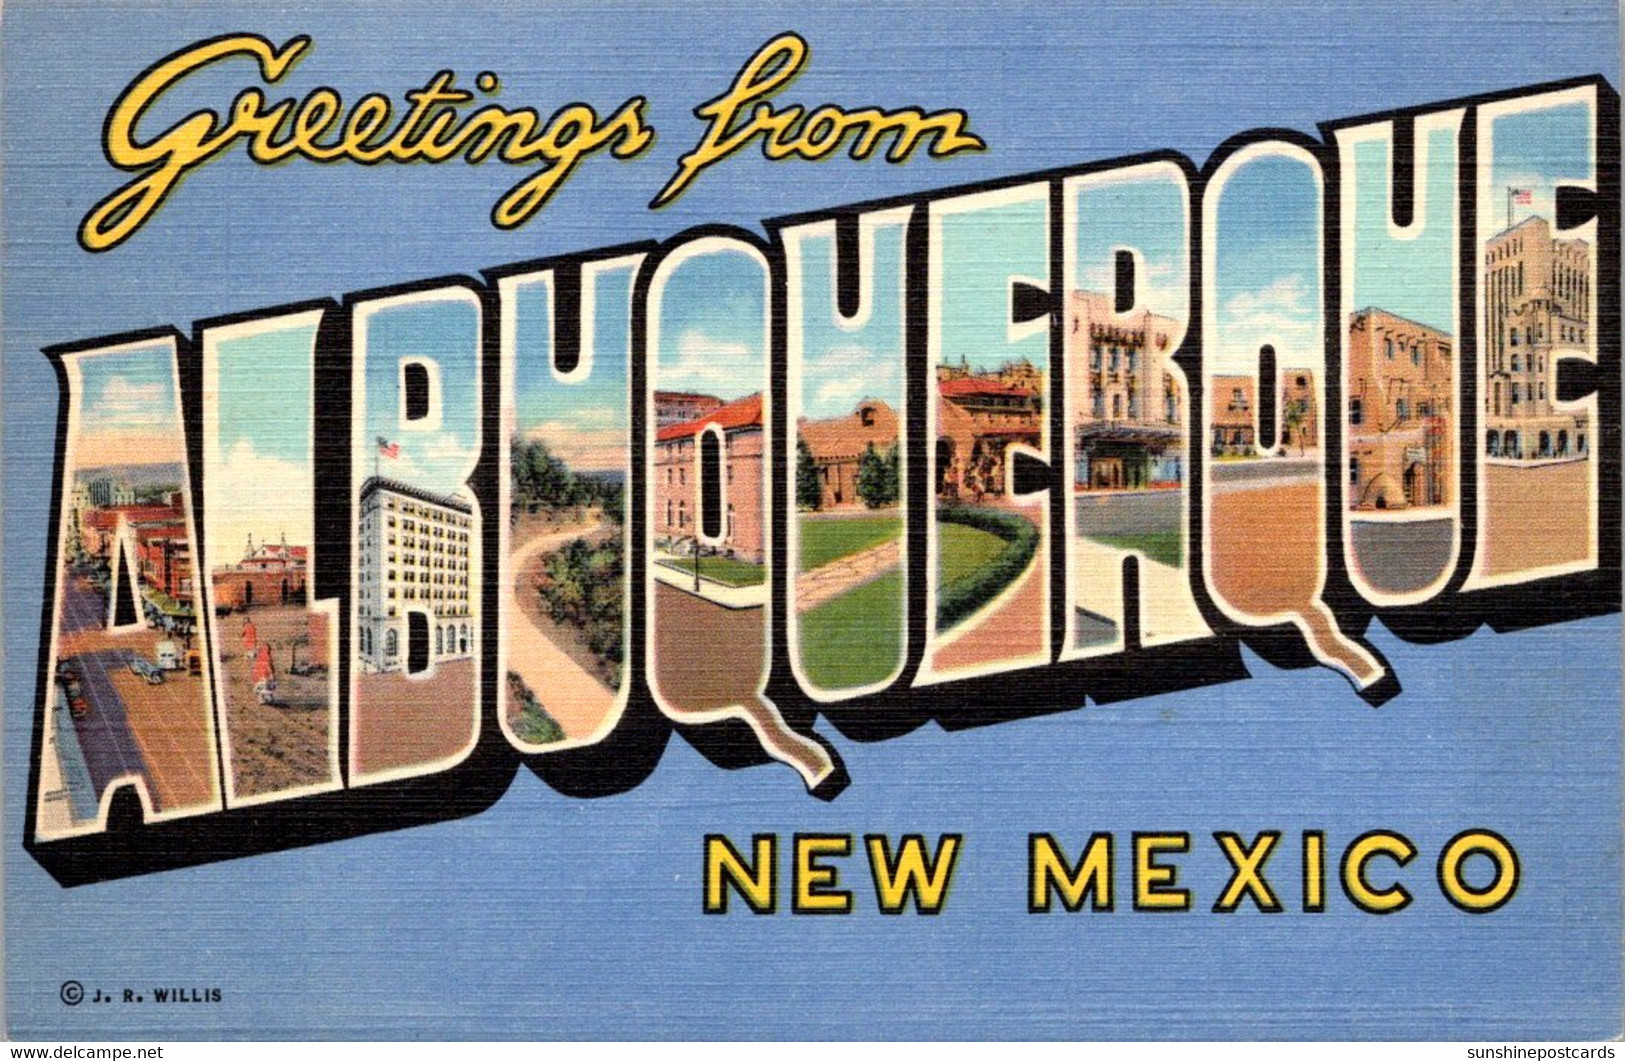 New Mexico Greetings From Albuquerque Large Letter Linen Curteich - Albuquerque